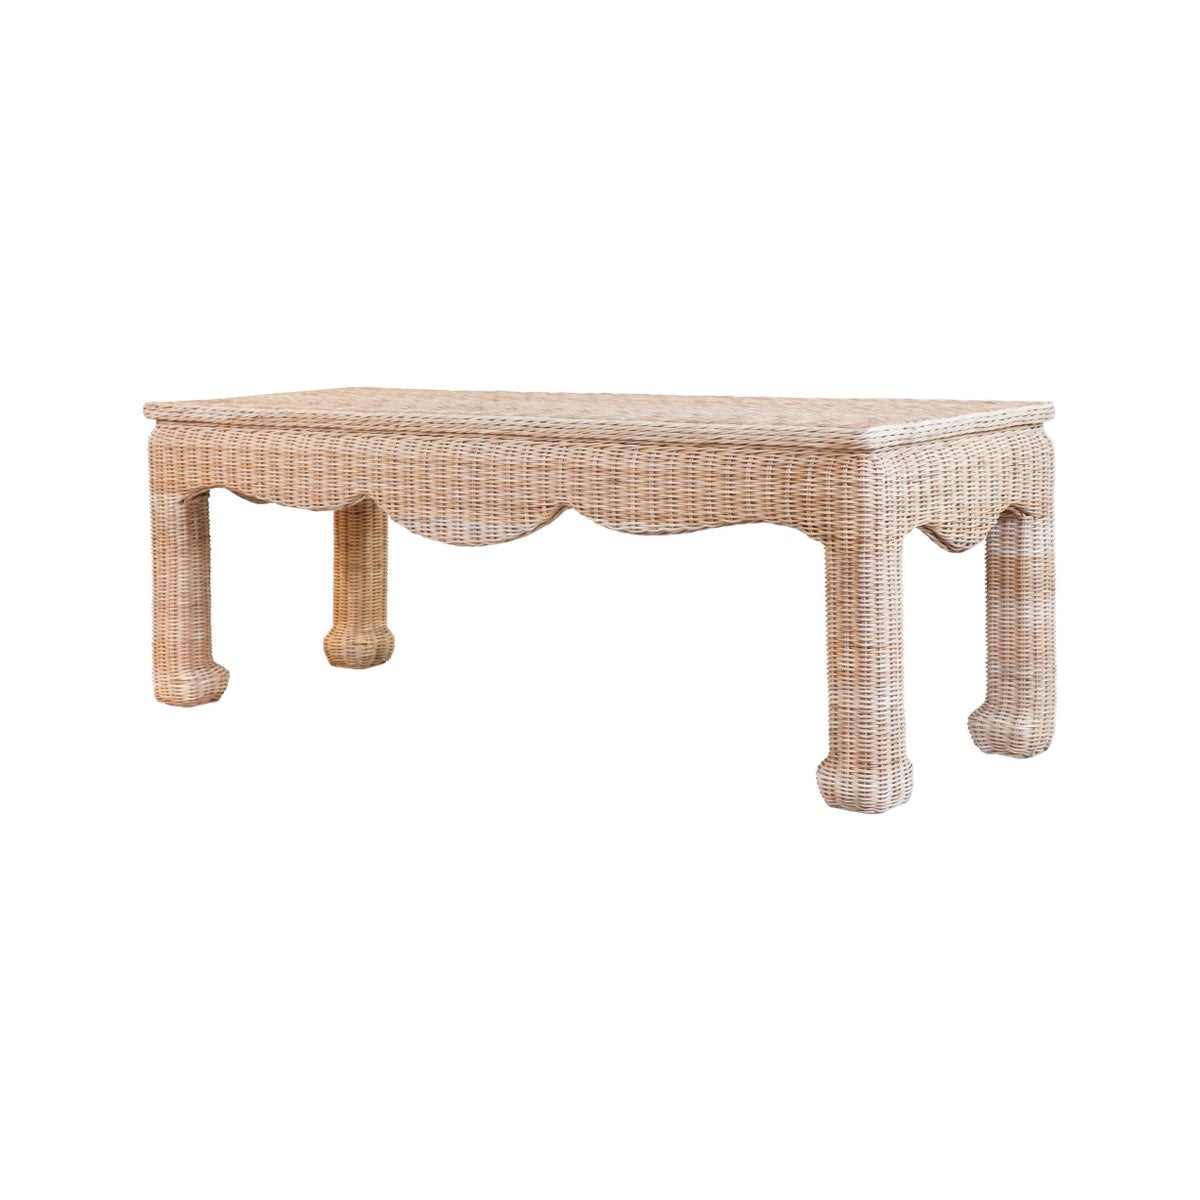 Ming Style Bench